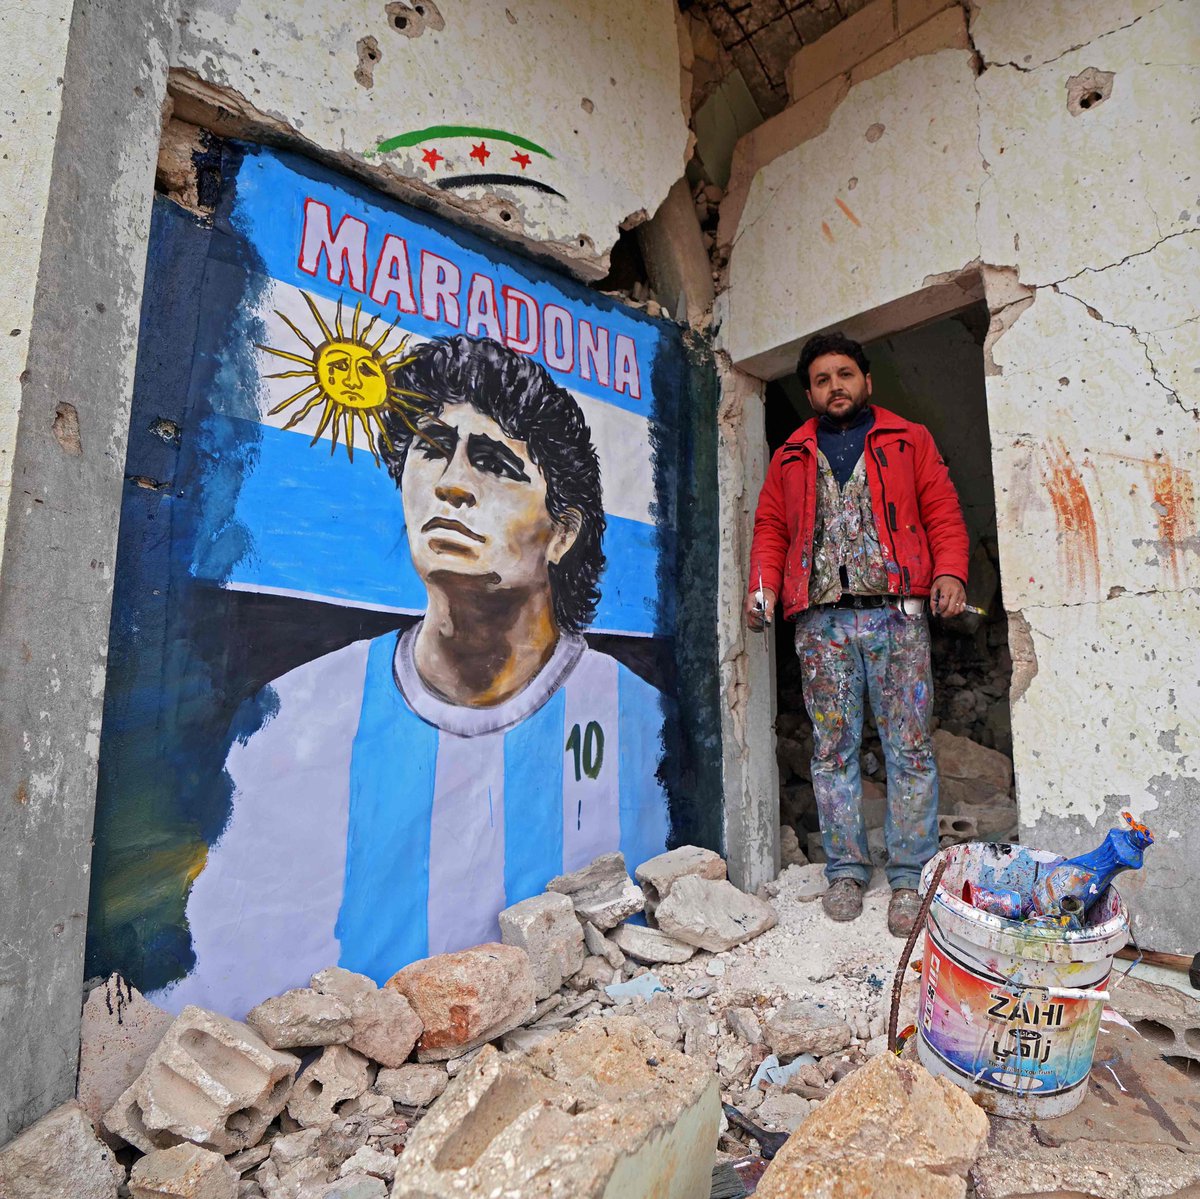 A painter draws a portrait of Maradona on the walls of a destroyed home in Syria. Diego's legacy will live on across the world.